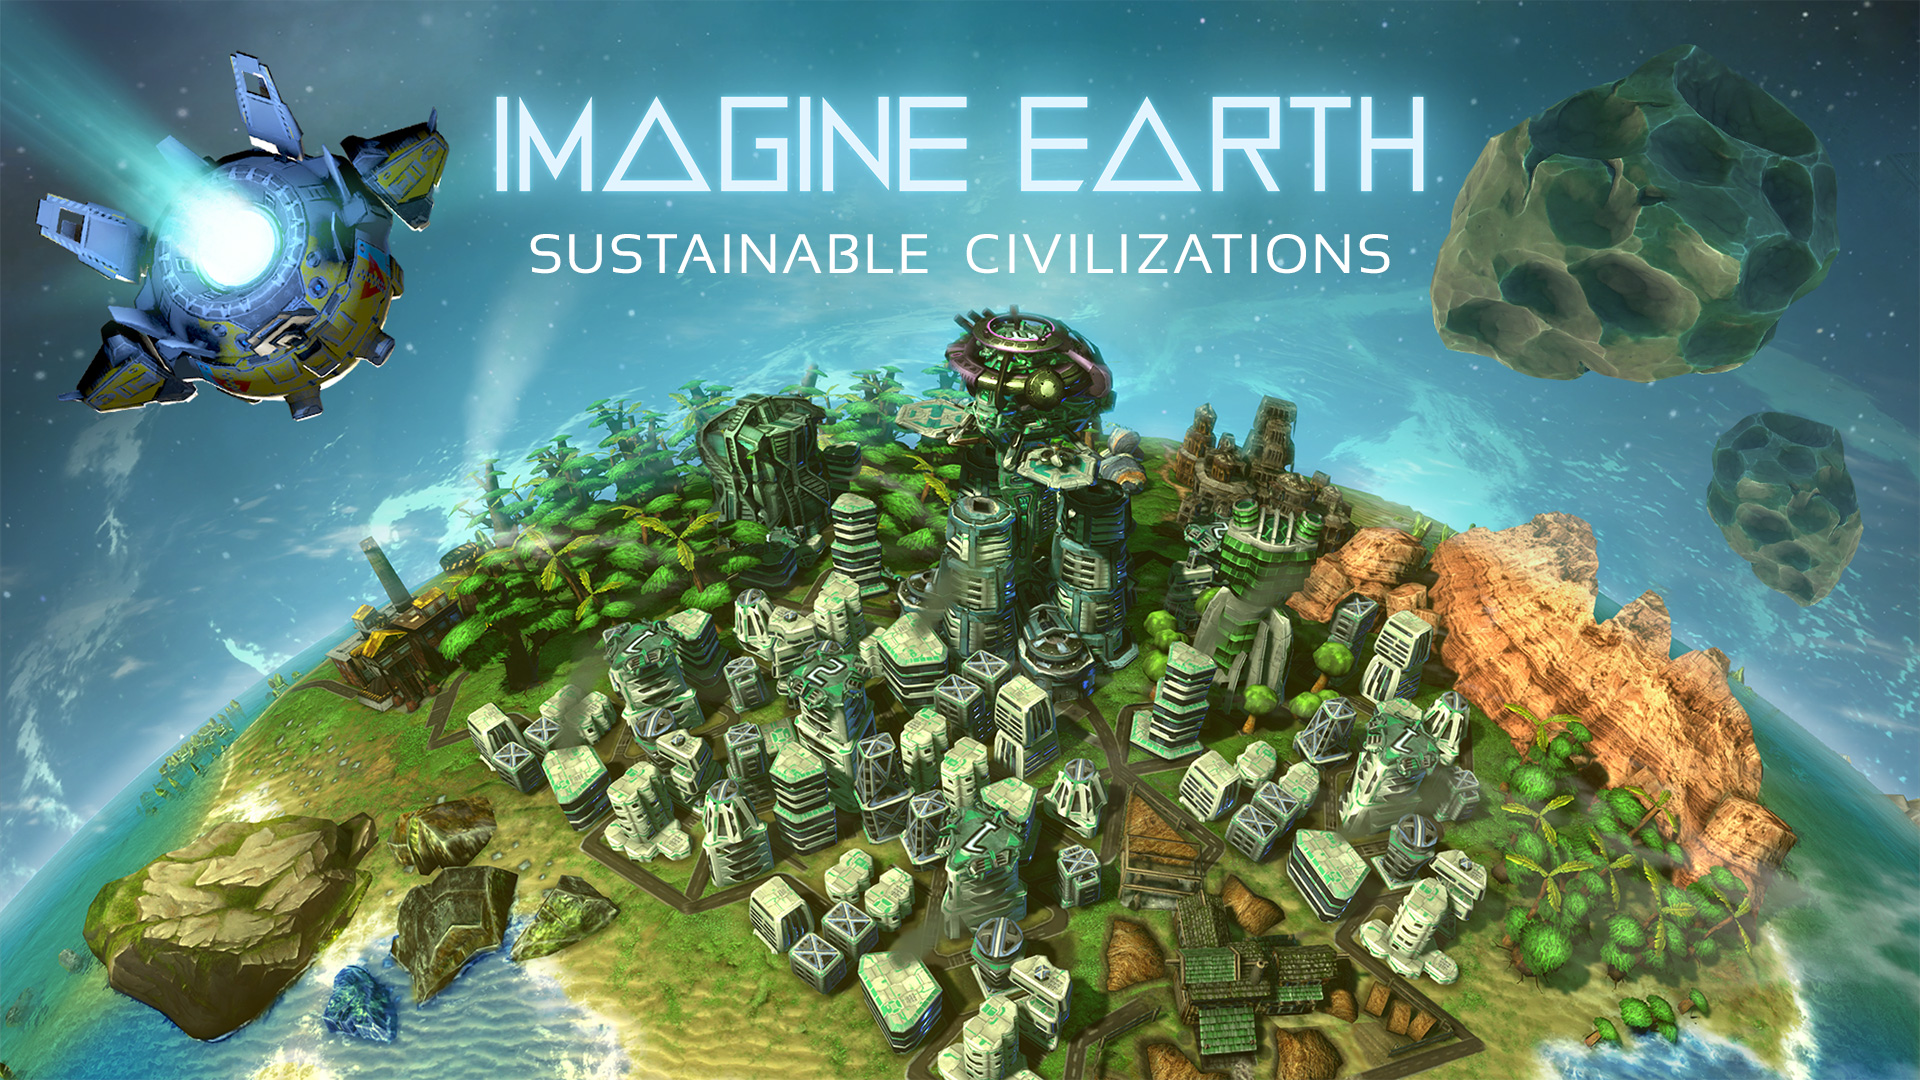 Colonize new planets and avoid ecological disaster in Imagine Earth